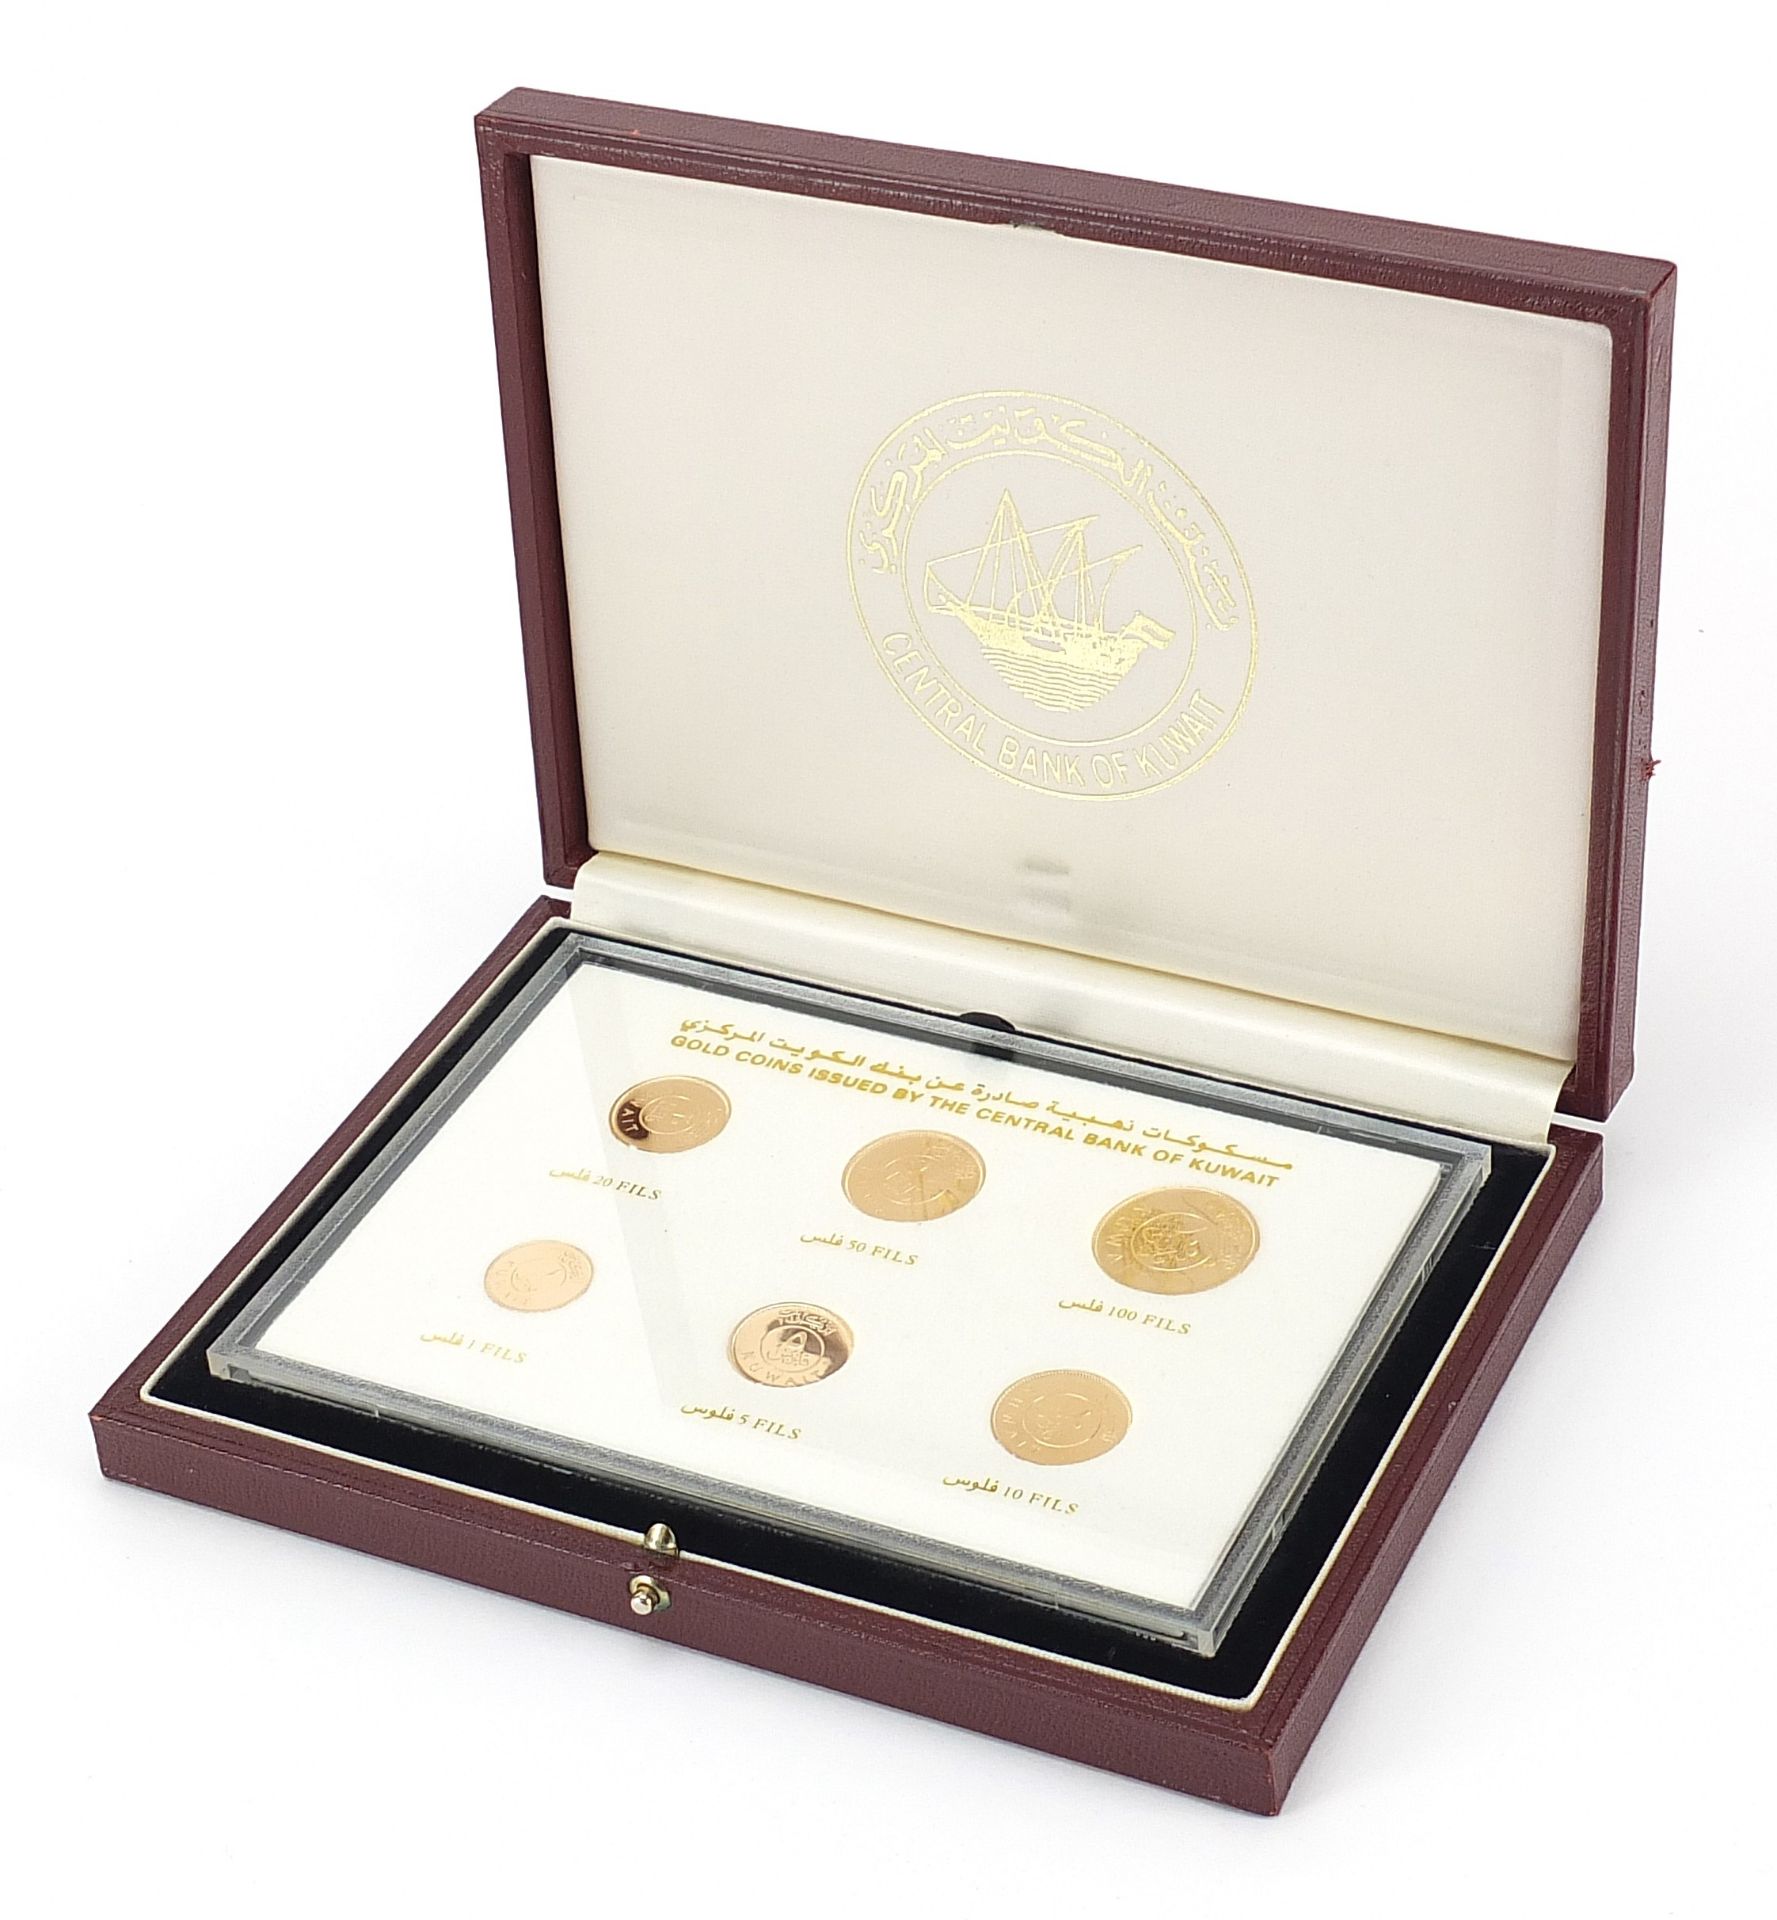 Set of six gold Kuwait Fils coins gold coins issued by The Central Bank of Kuwait' comprising 1